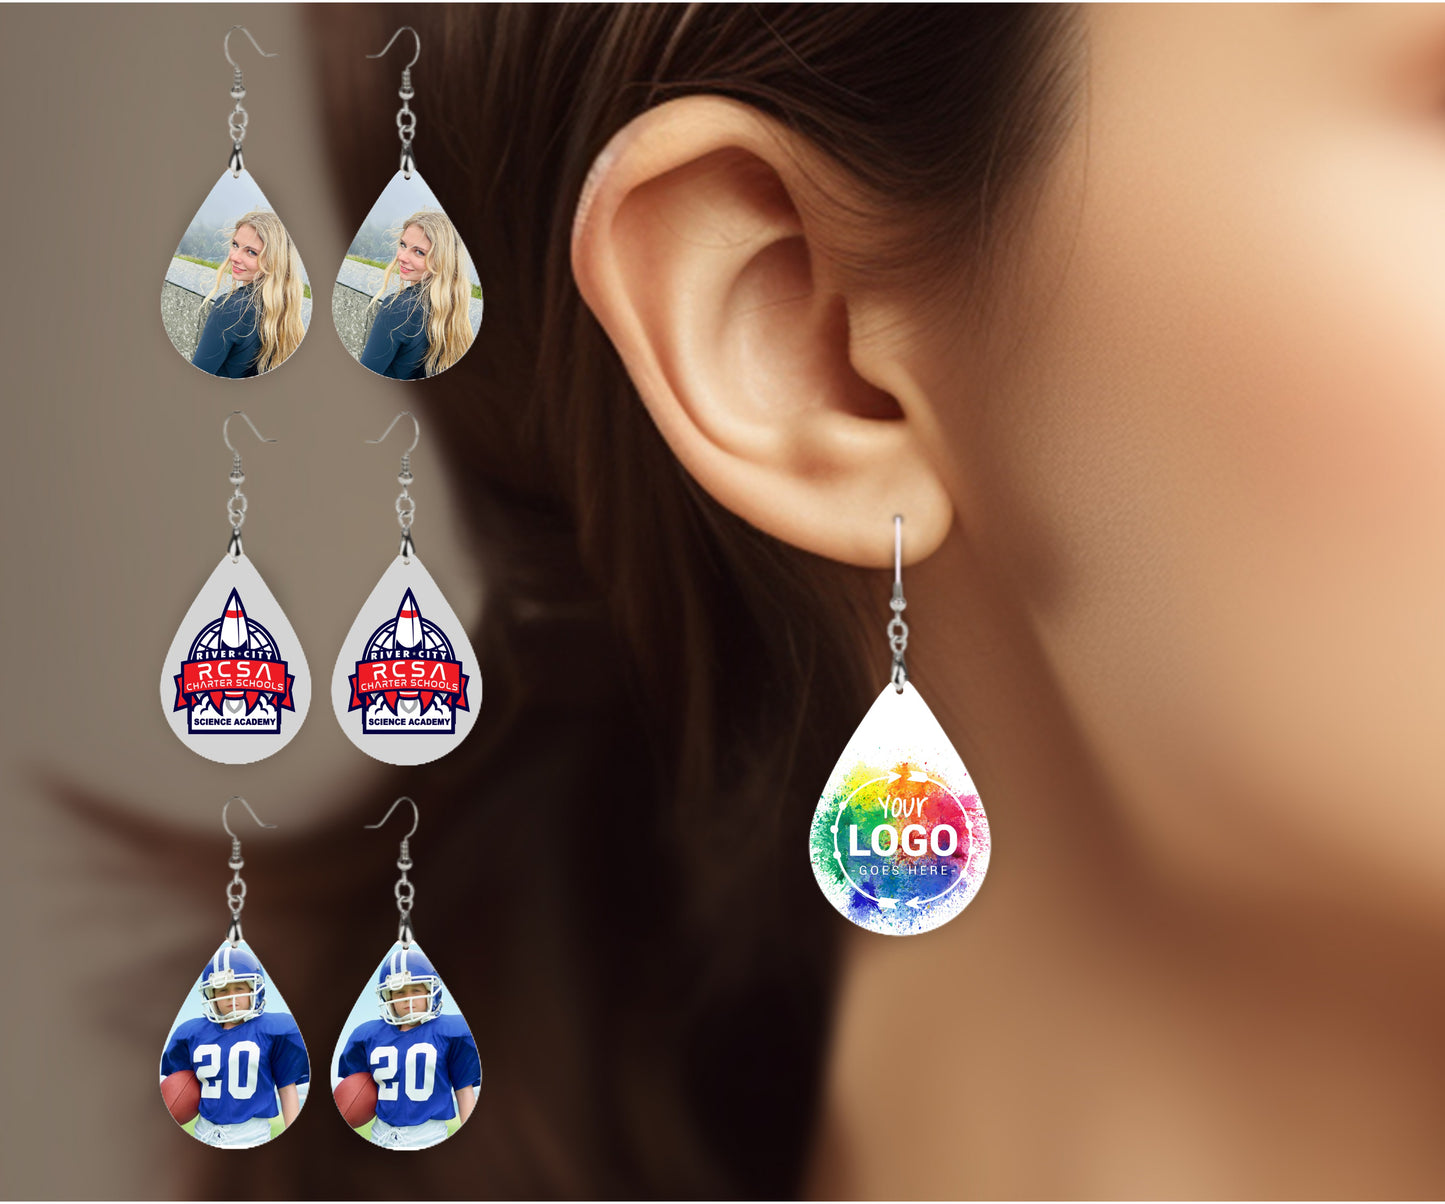 Design Your Own Personalized Earrings